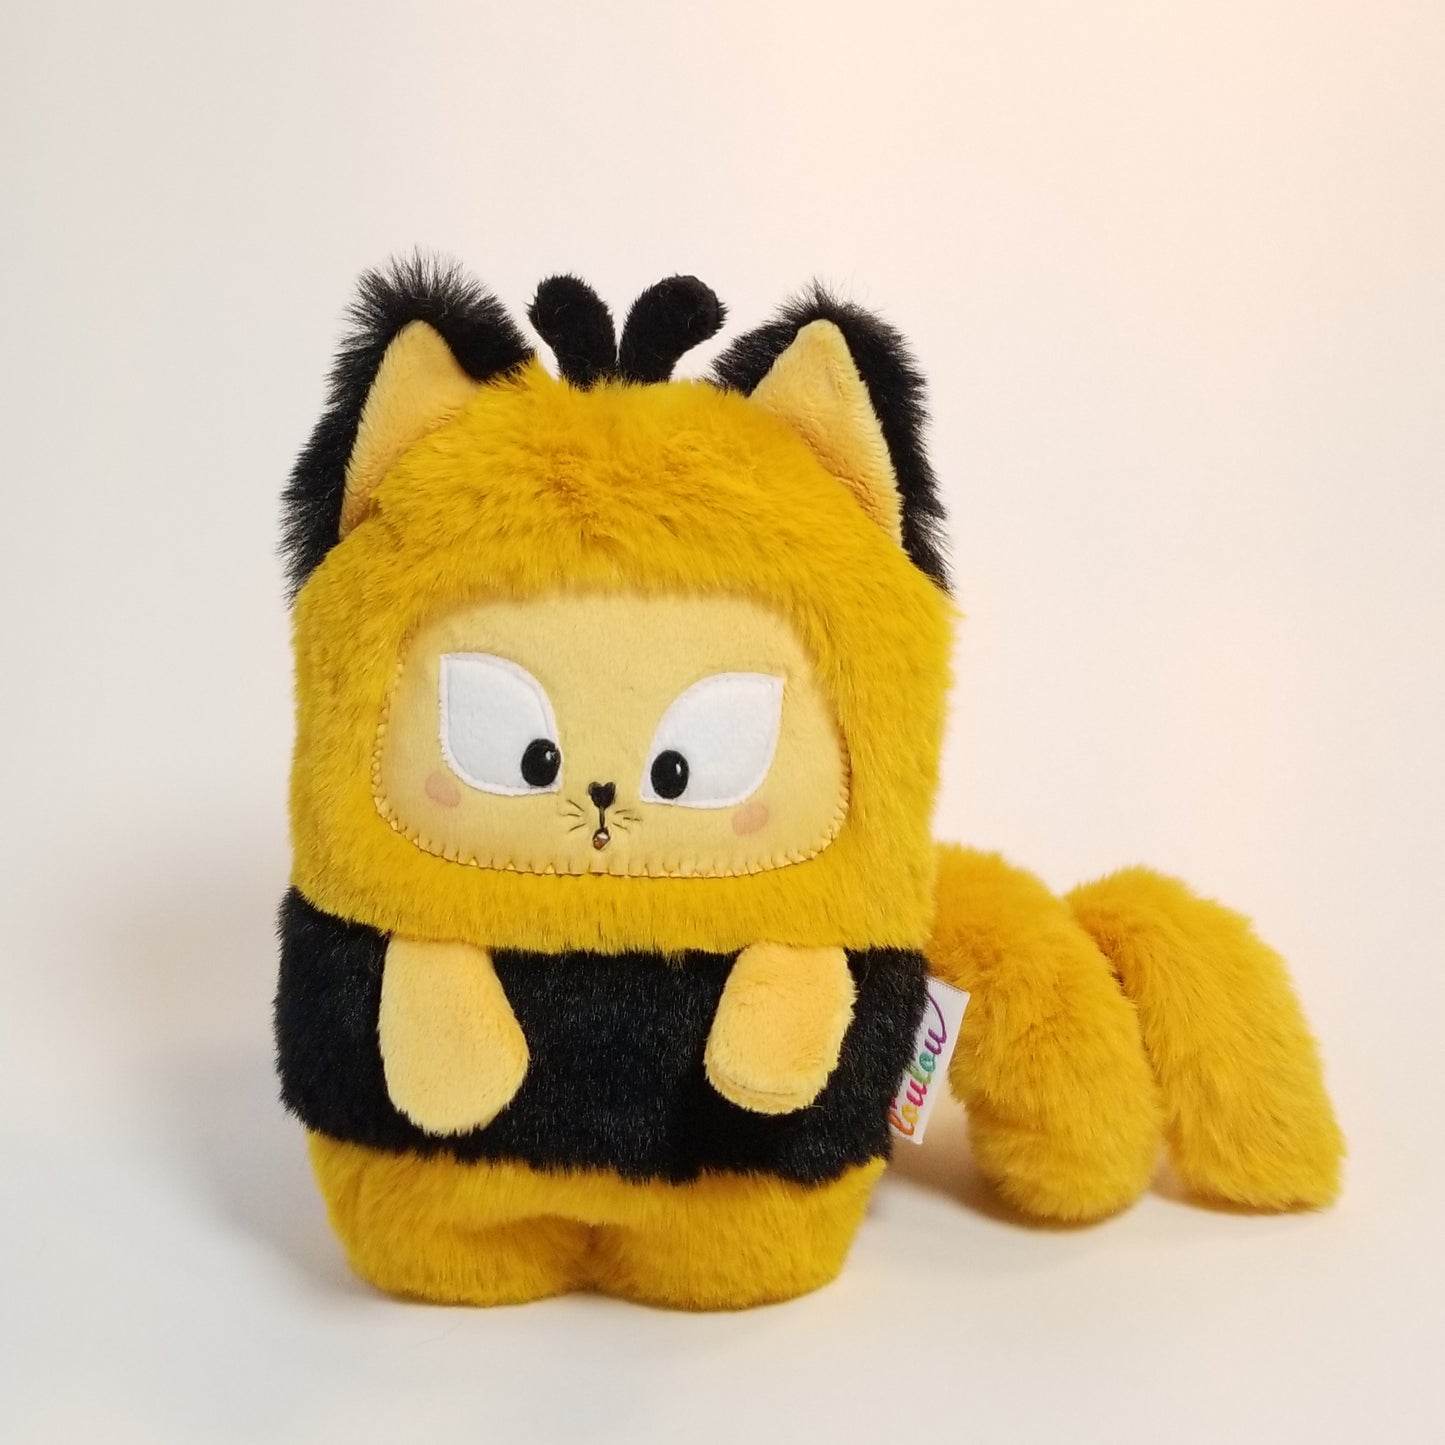 1 plush toy Albee Kitty - Reserved